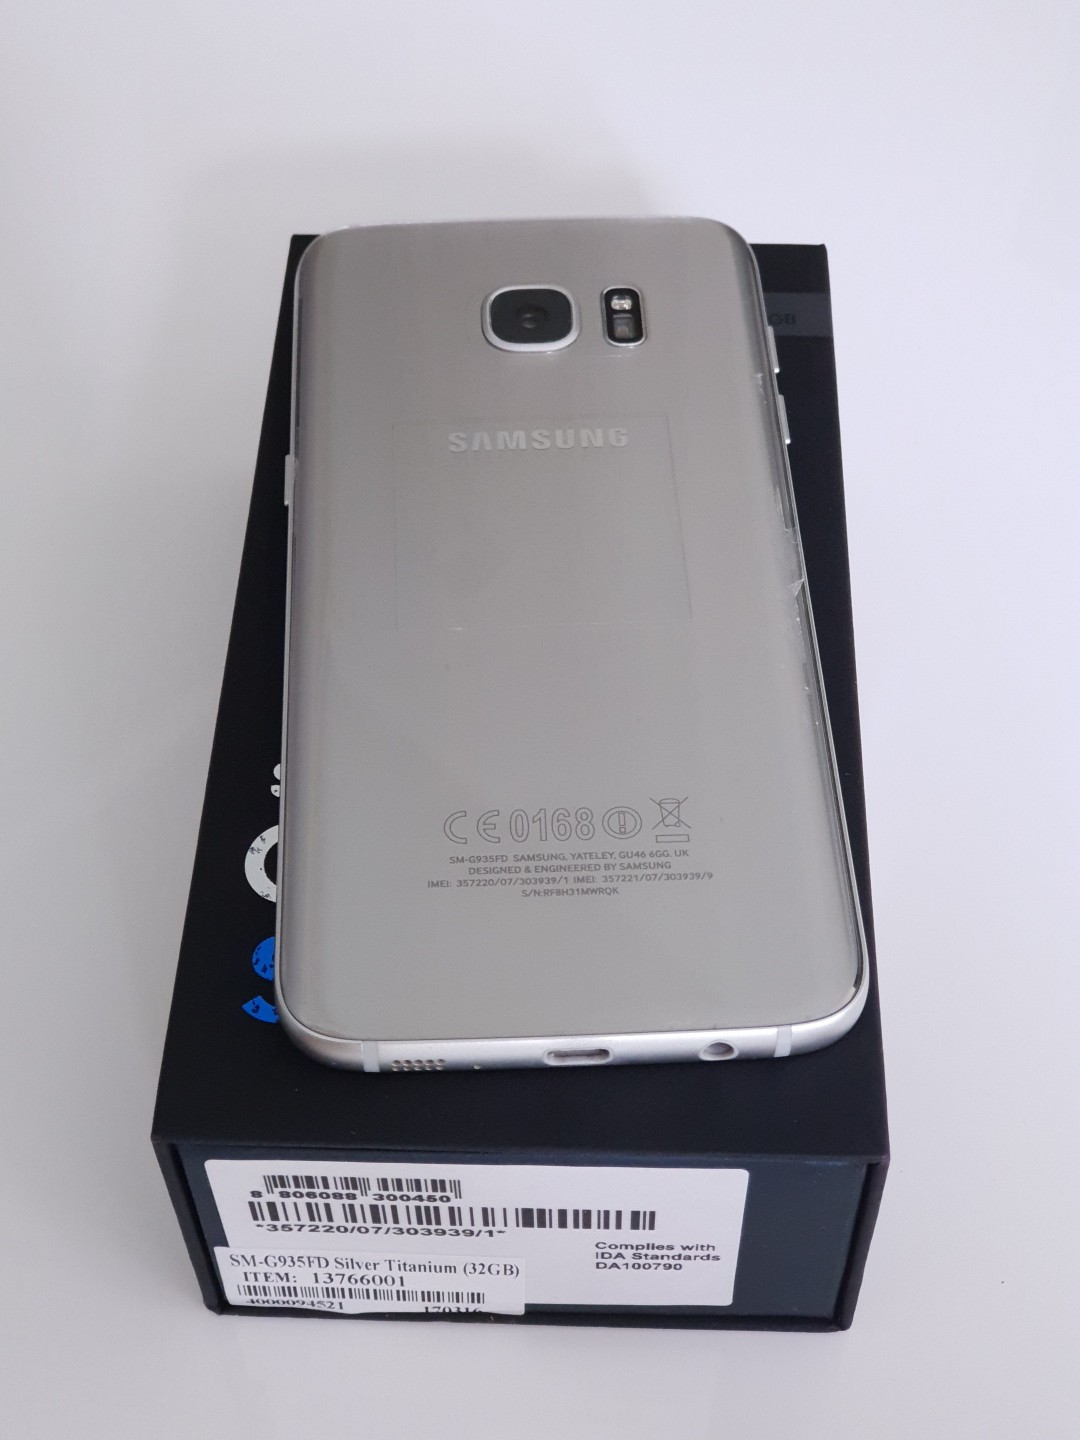 Samsung Galaxy S7 Silver Titanium (32GB), Mobile Phones Gadgets, Android Phones, Samsung on Carousell